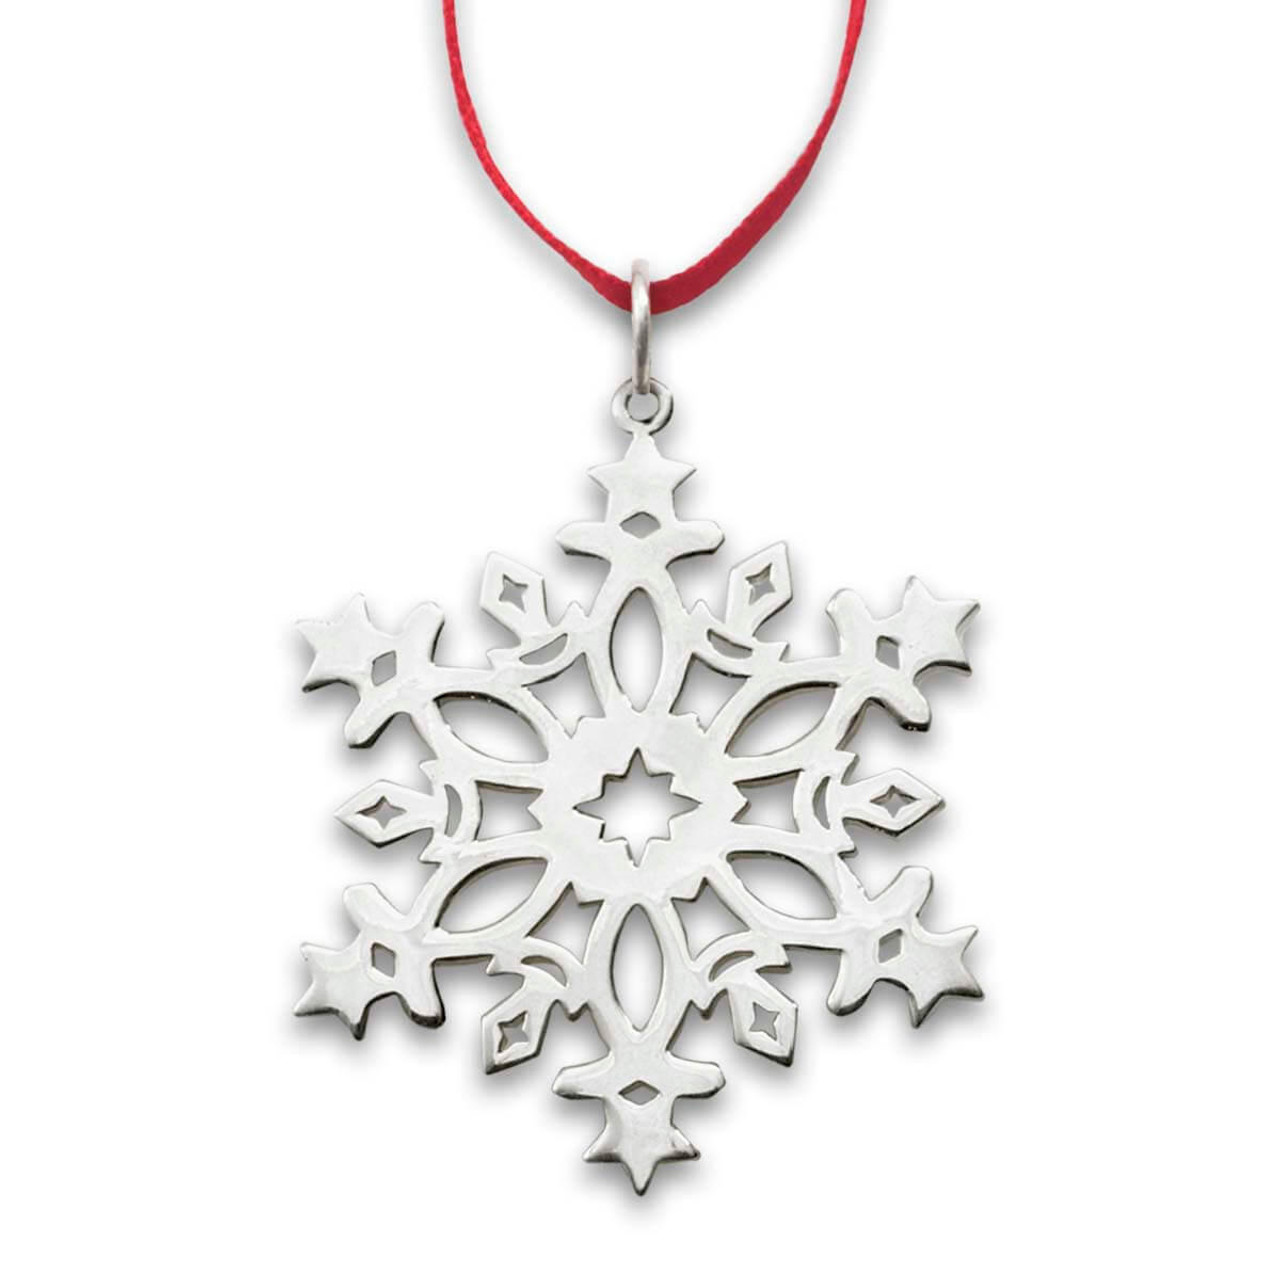 4 Snowflake Charms/ Christmas Pendant/ Silver Snowflake Jewelry/ Winter/  Jewelry Making Supplies 